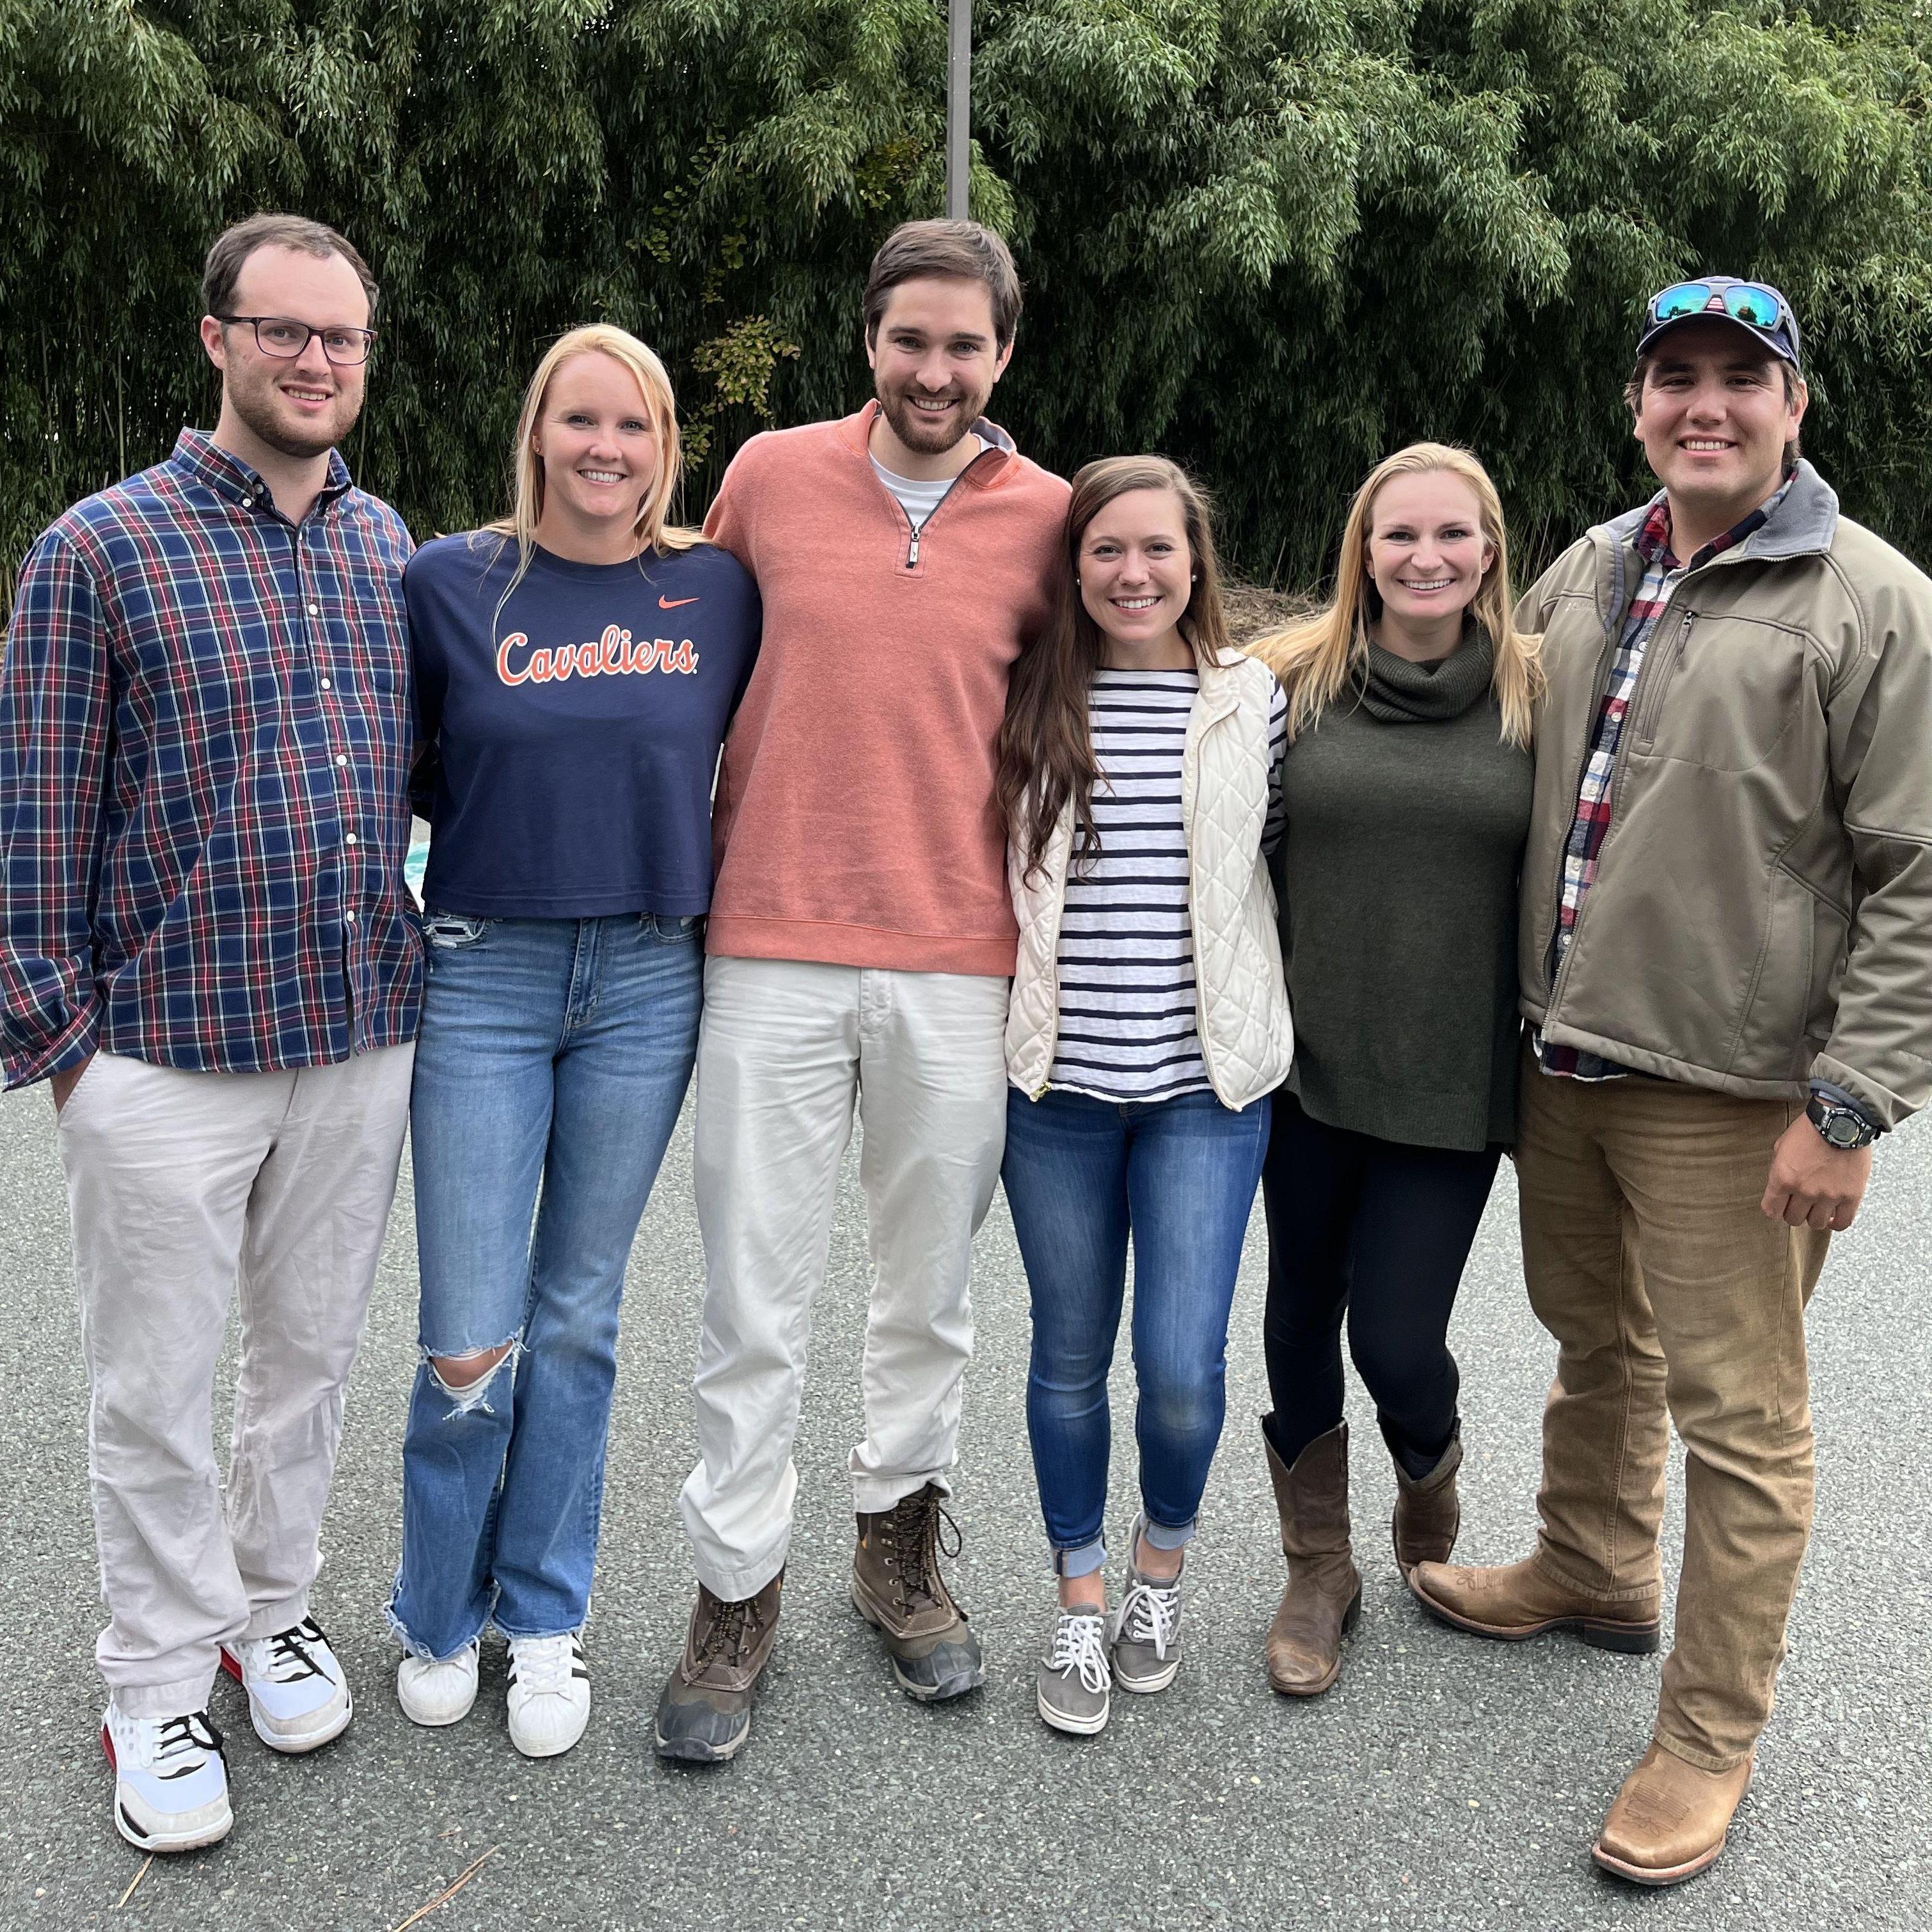 Tailgating for a UVA Football game with Cole, Mary Ann, Lauren, and Juan.